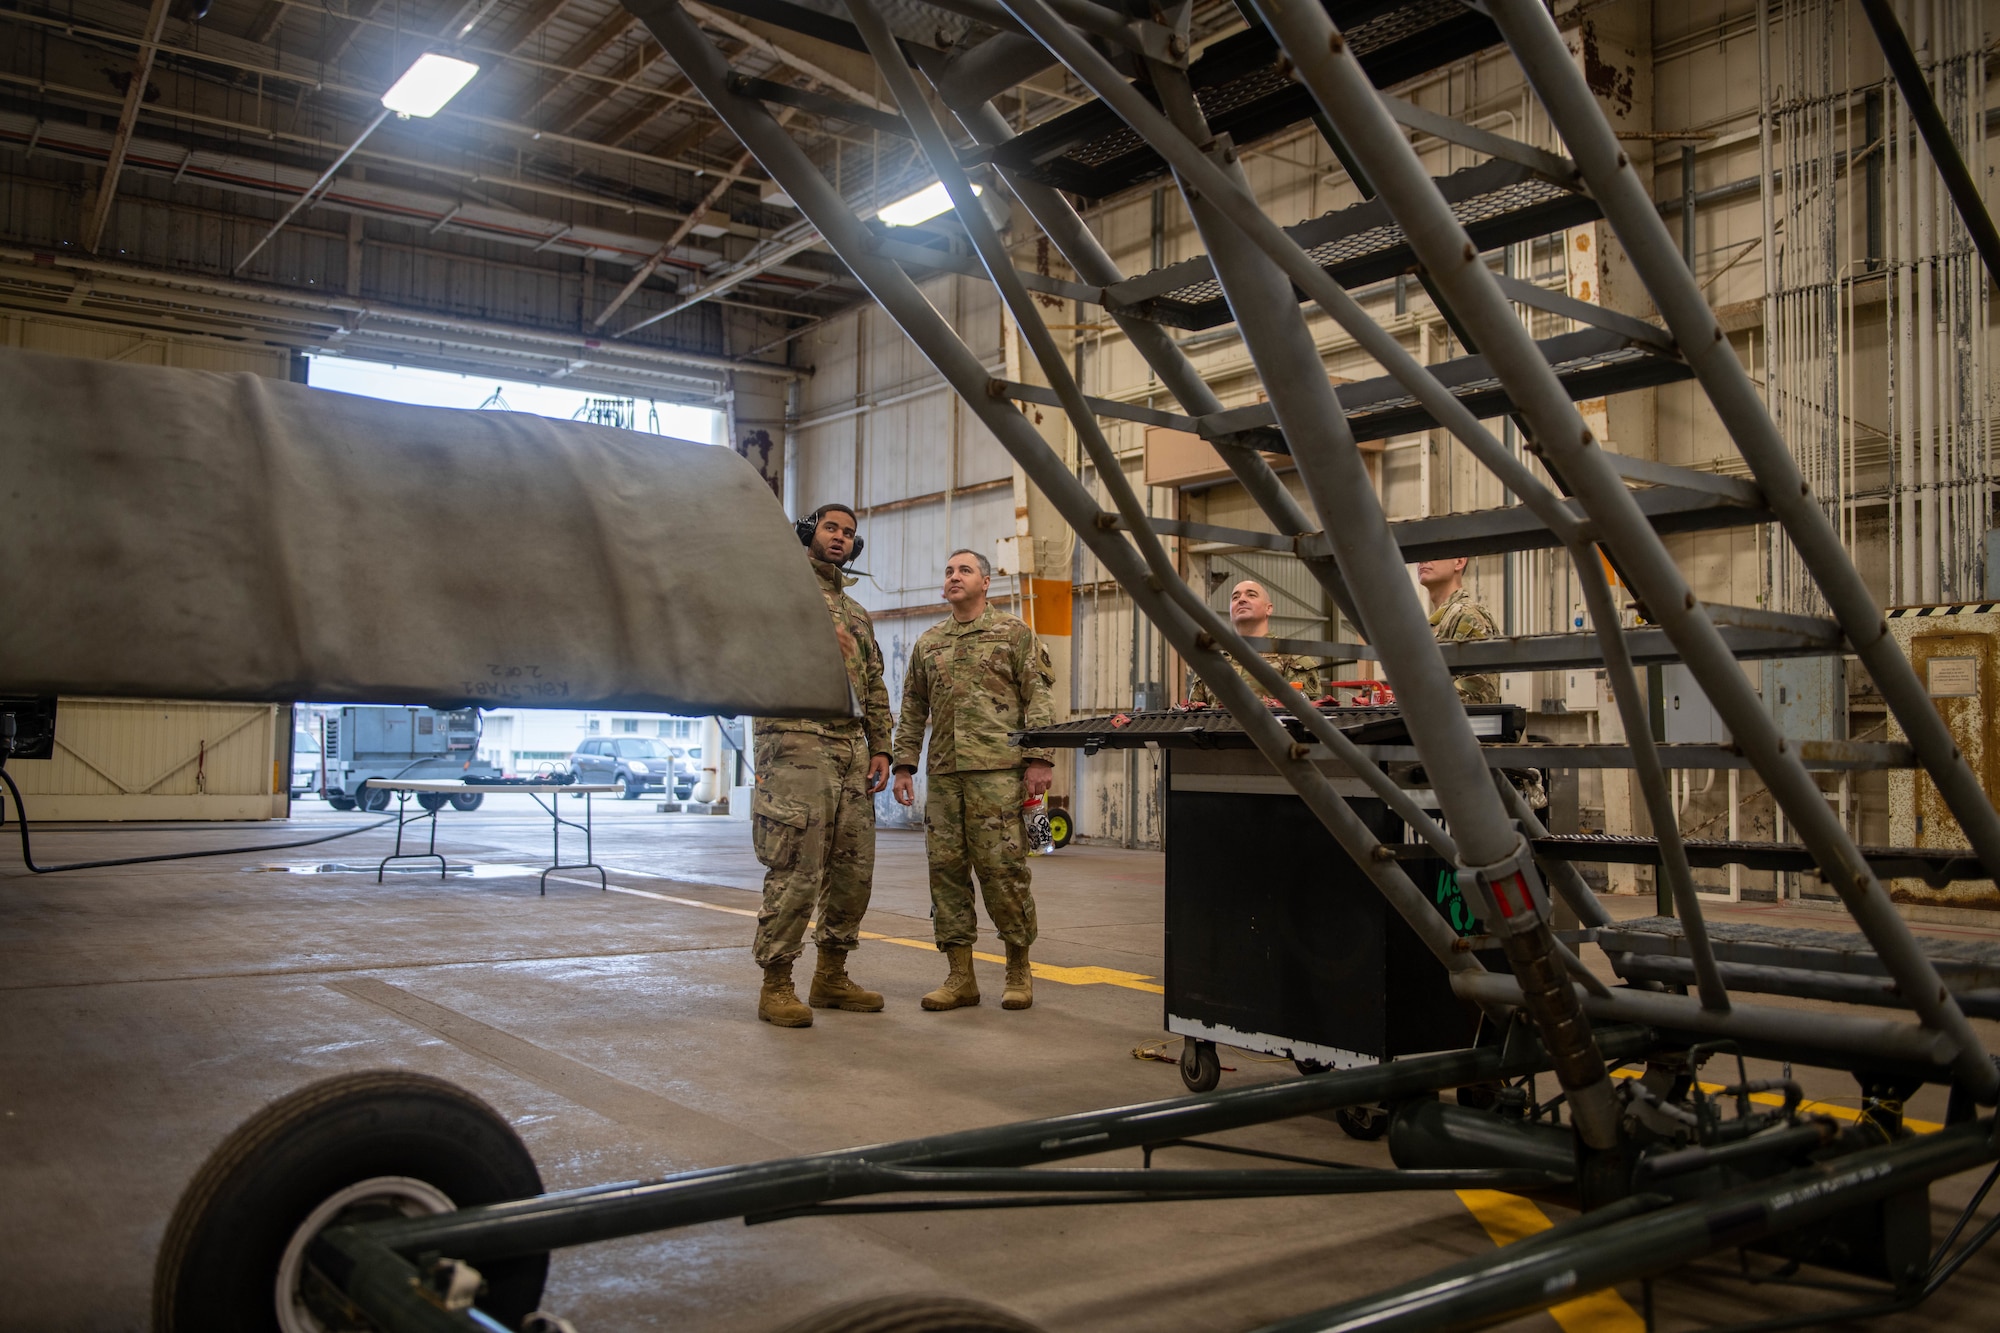 A group of Airmen stand beside a helicopter under maintenance.